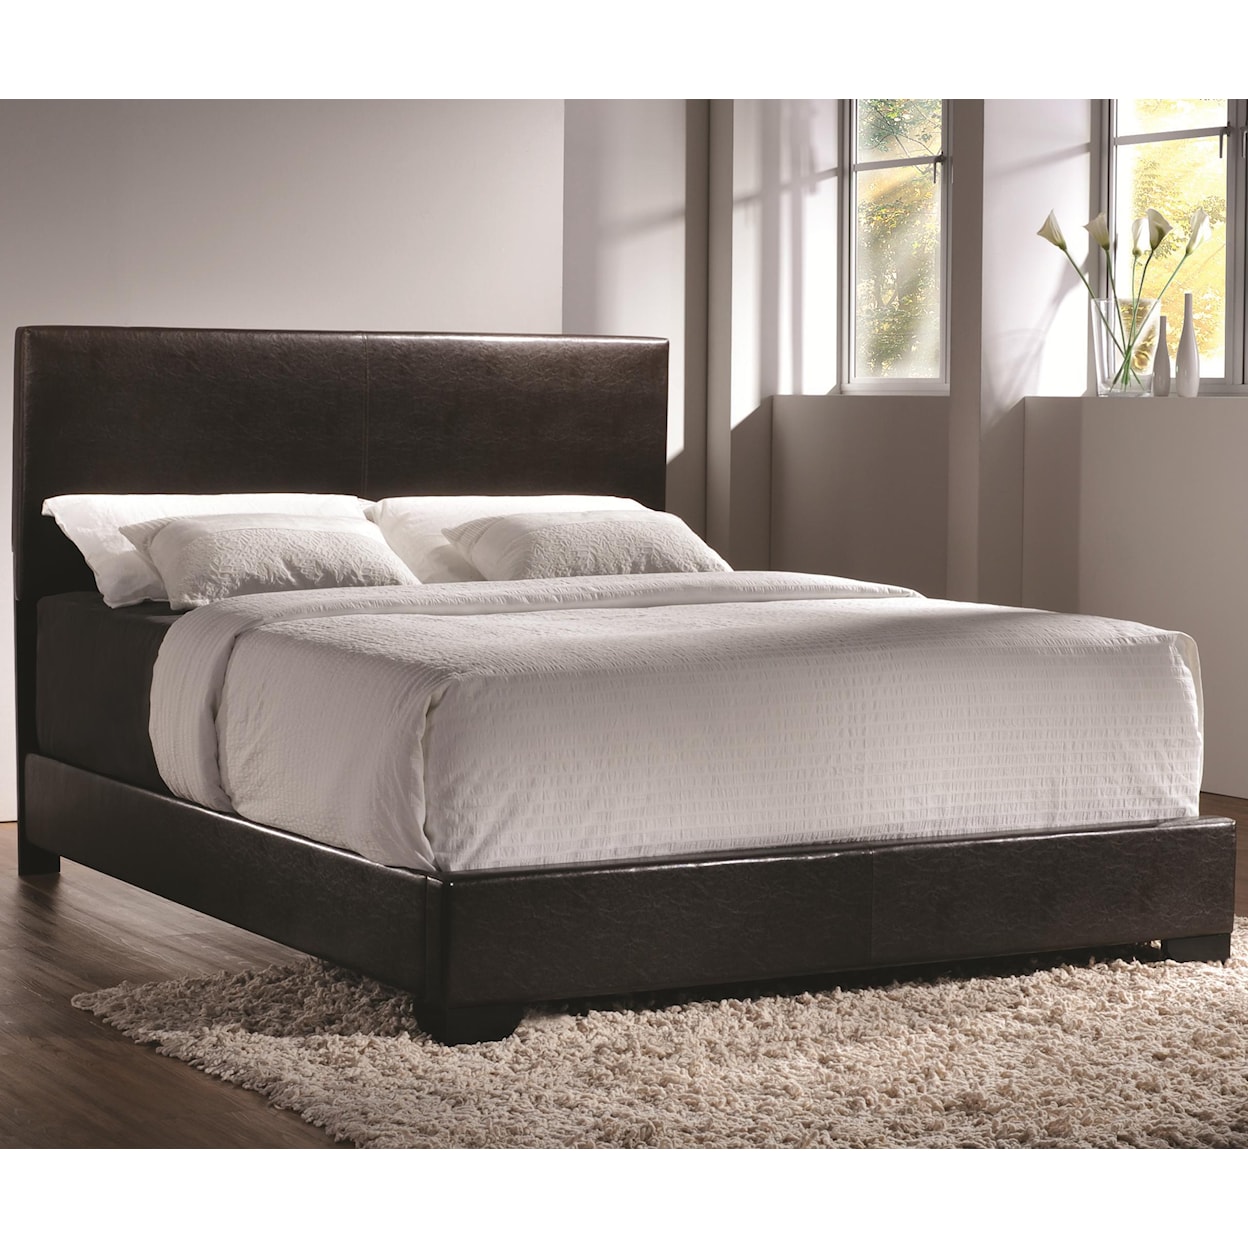 Coaster Conner Cal King Bed